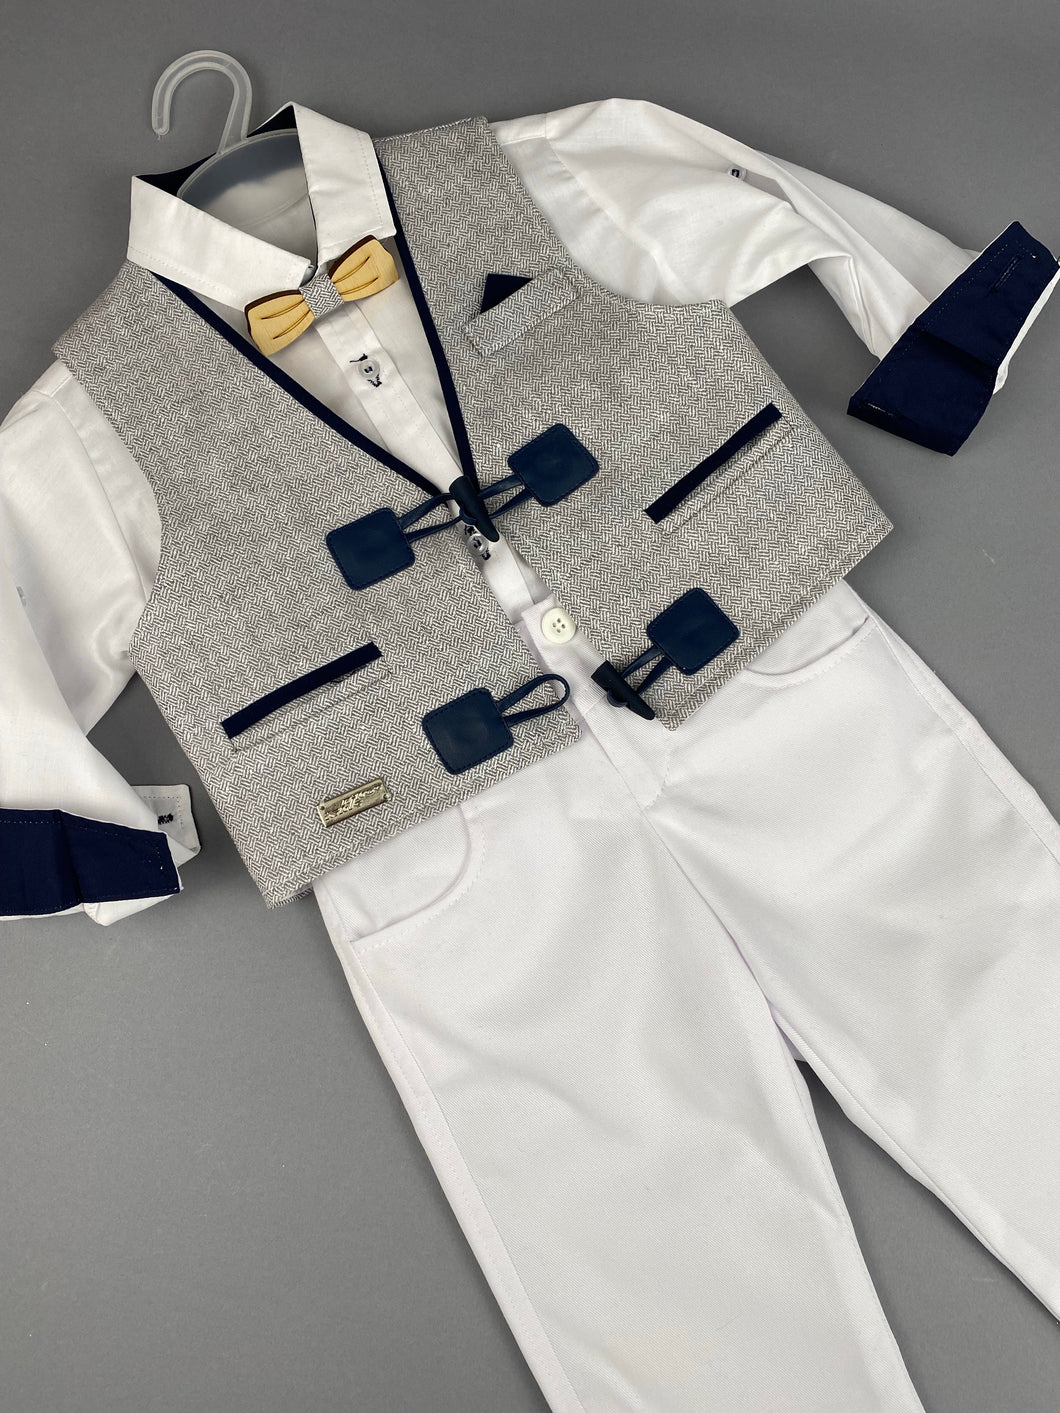 Rosies Collections 6pc Suit, Pants, Vest, Dress Shirt, Bow Tie, Belt and Hat, made in Greece,  exclusively for Rosies Collections. B20227